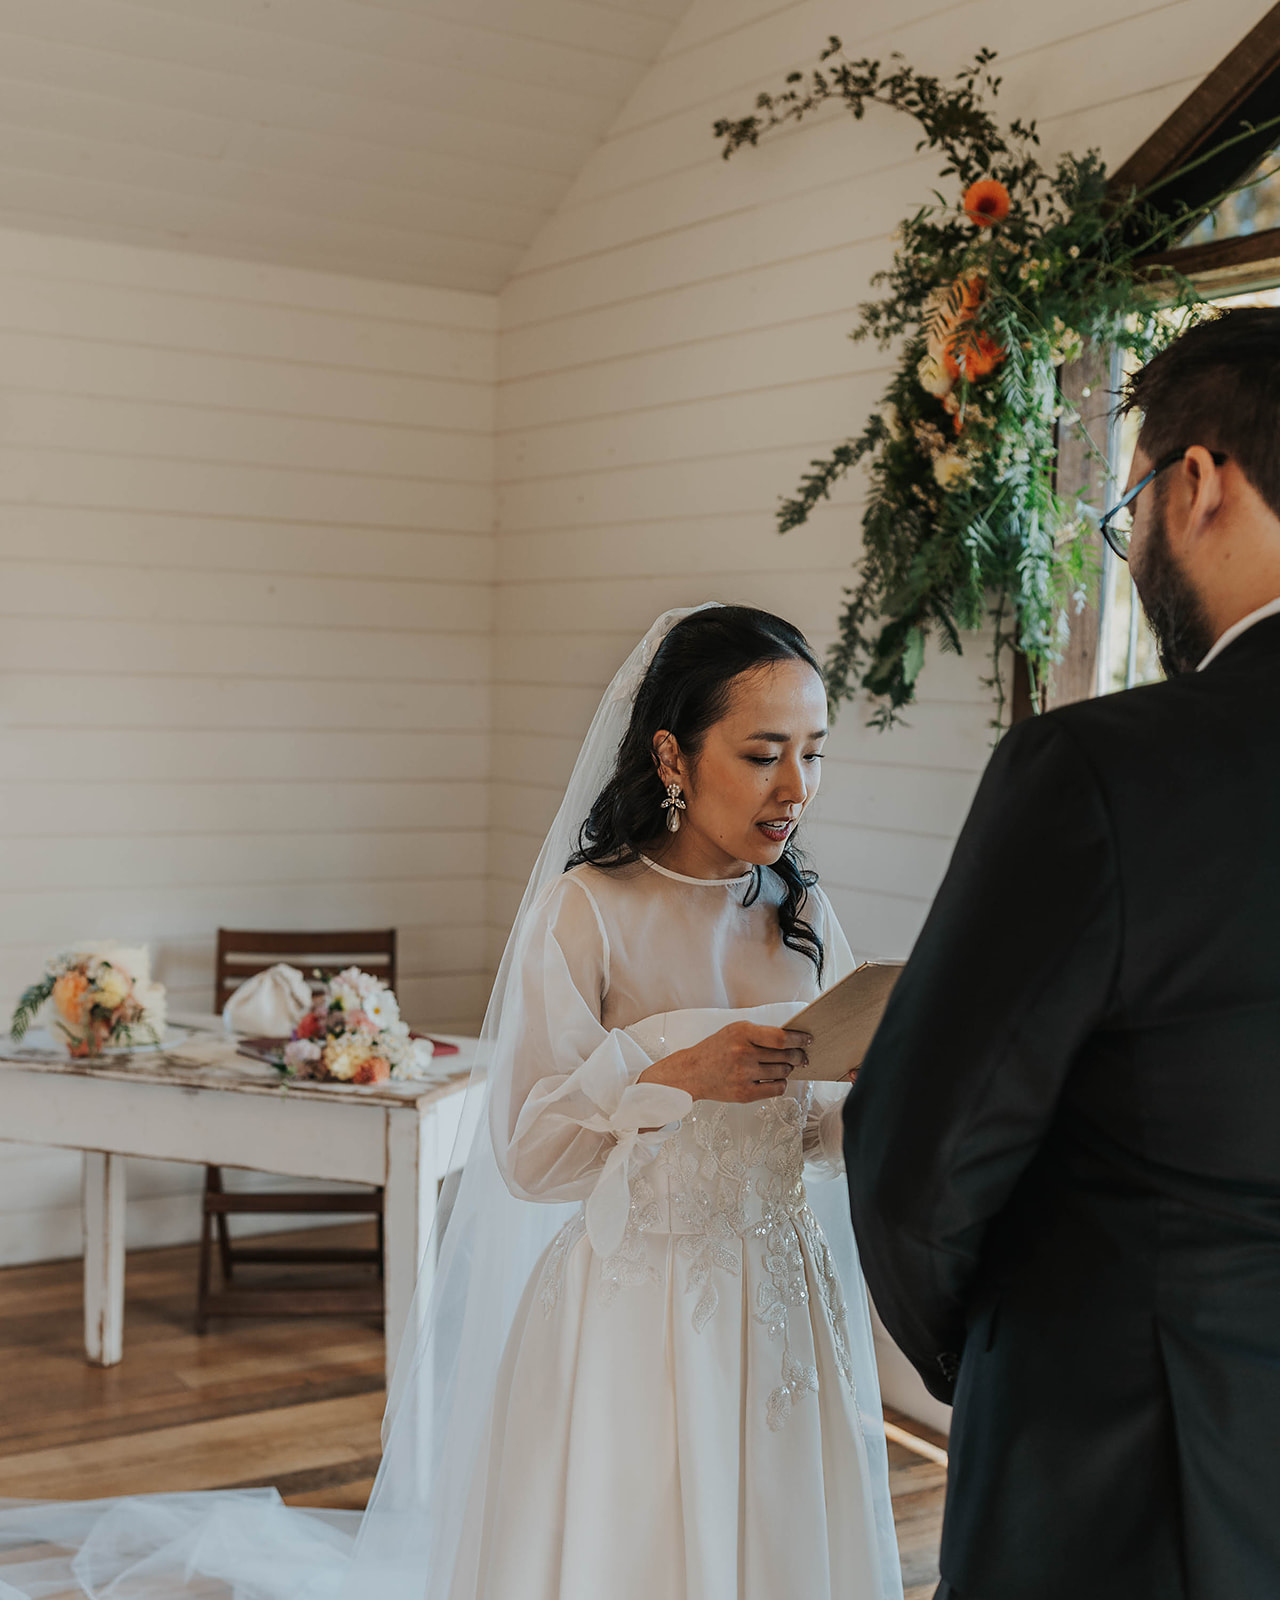 The bride exchanges her vows in an intimate ceremony at Sault, Daylesford.